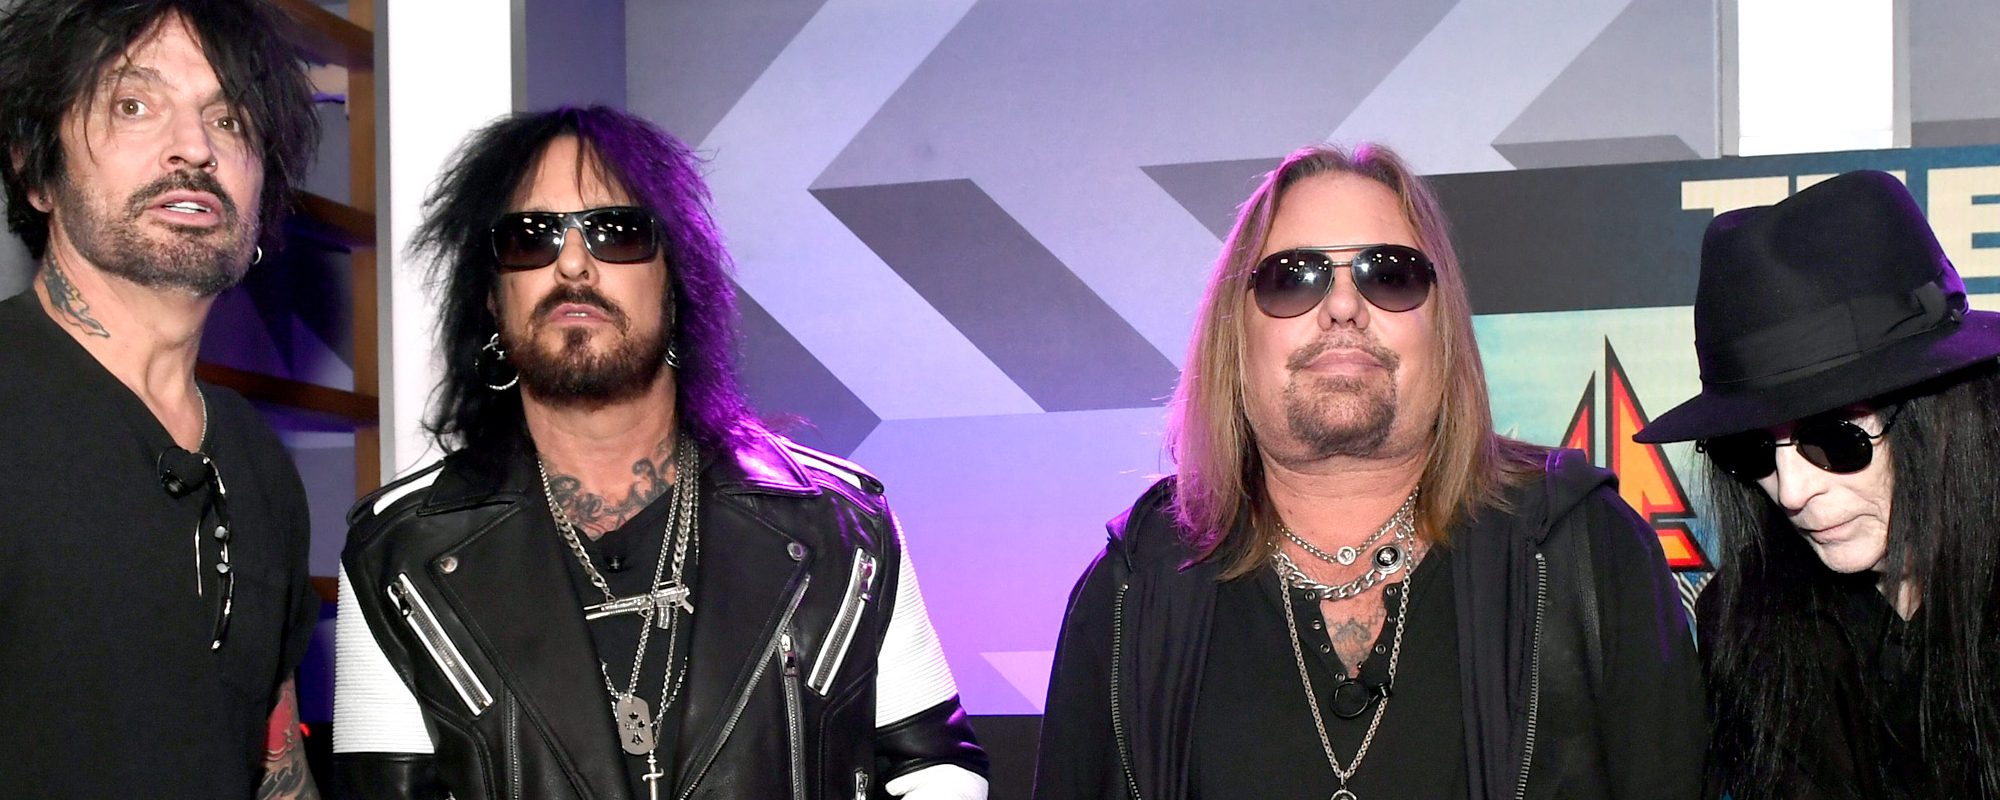 Vince Neil Claims Motley Crue Will Be "Dead" Before Inducted Into the Rock & Roll Hall of Fame